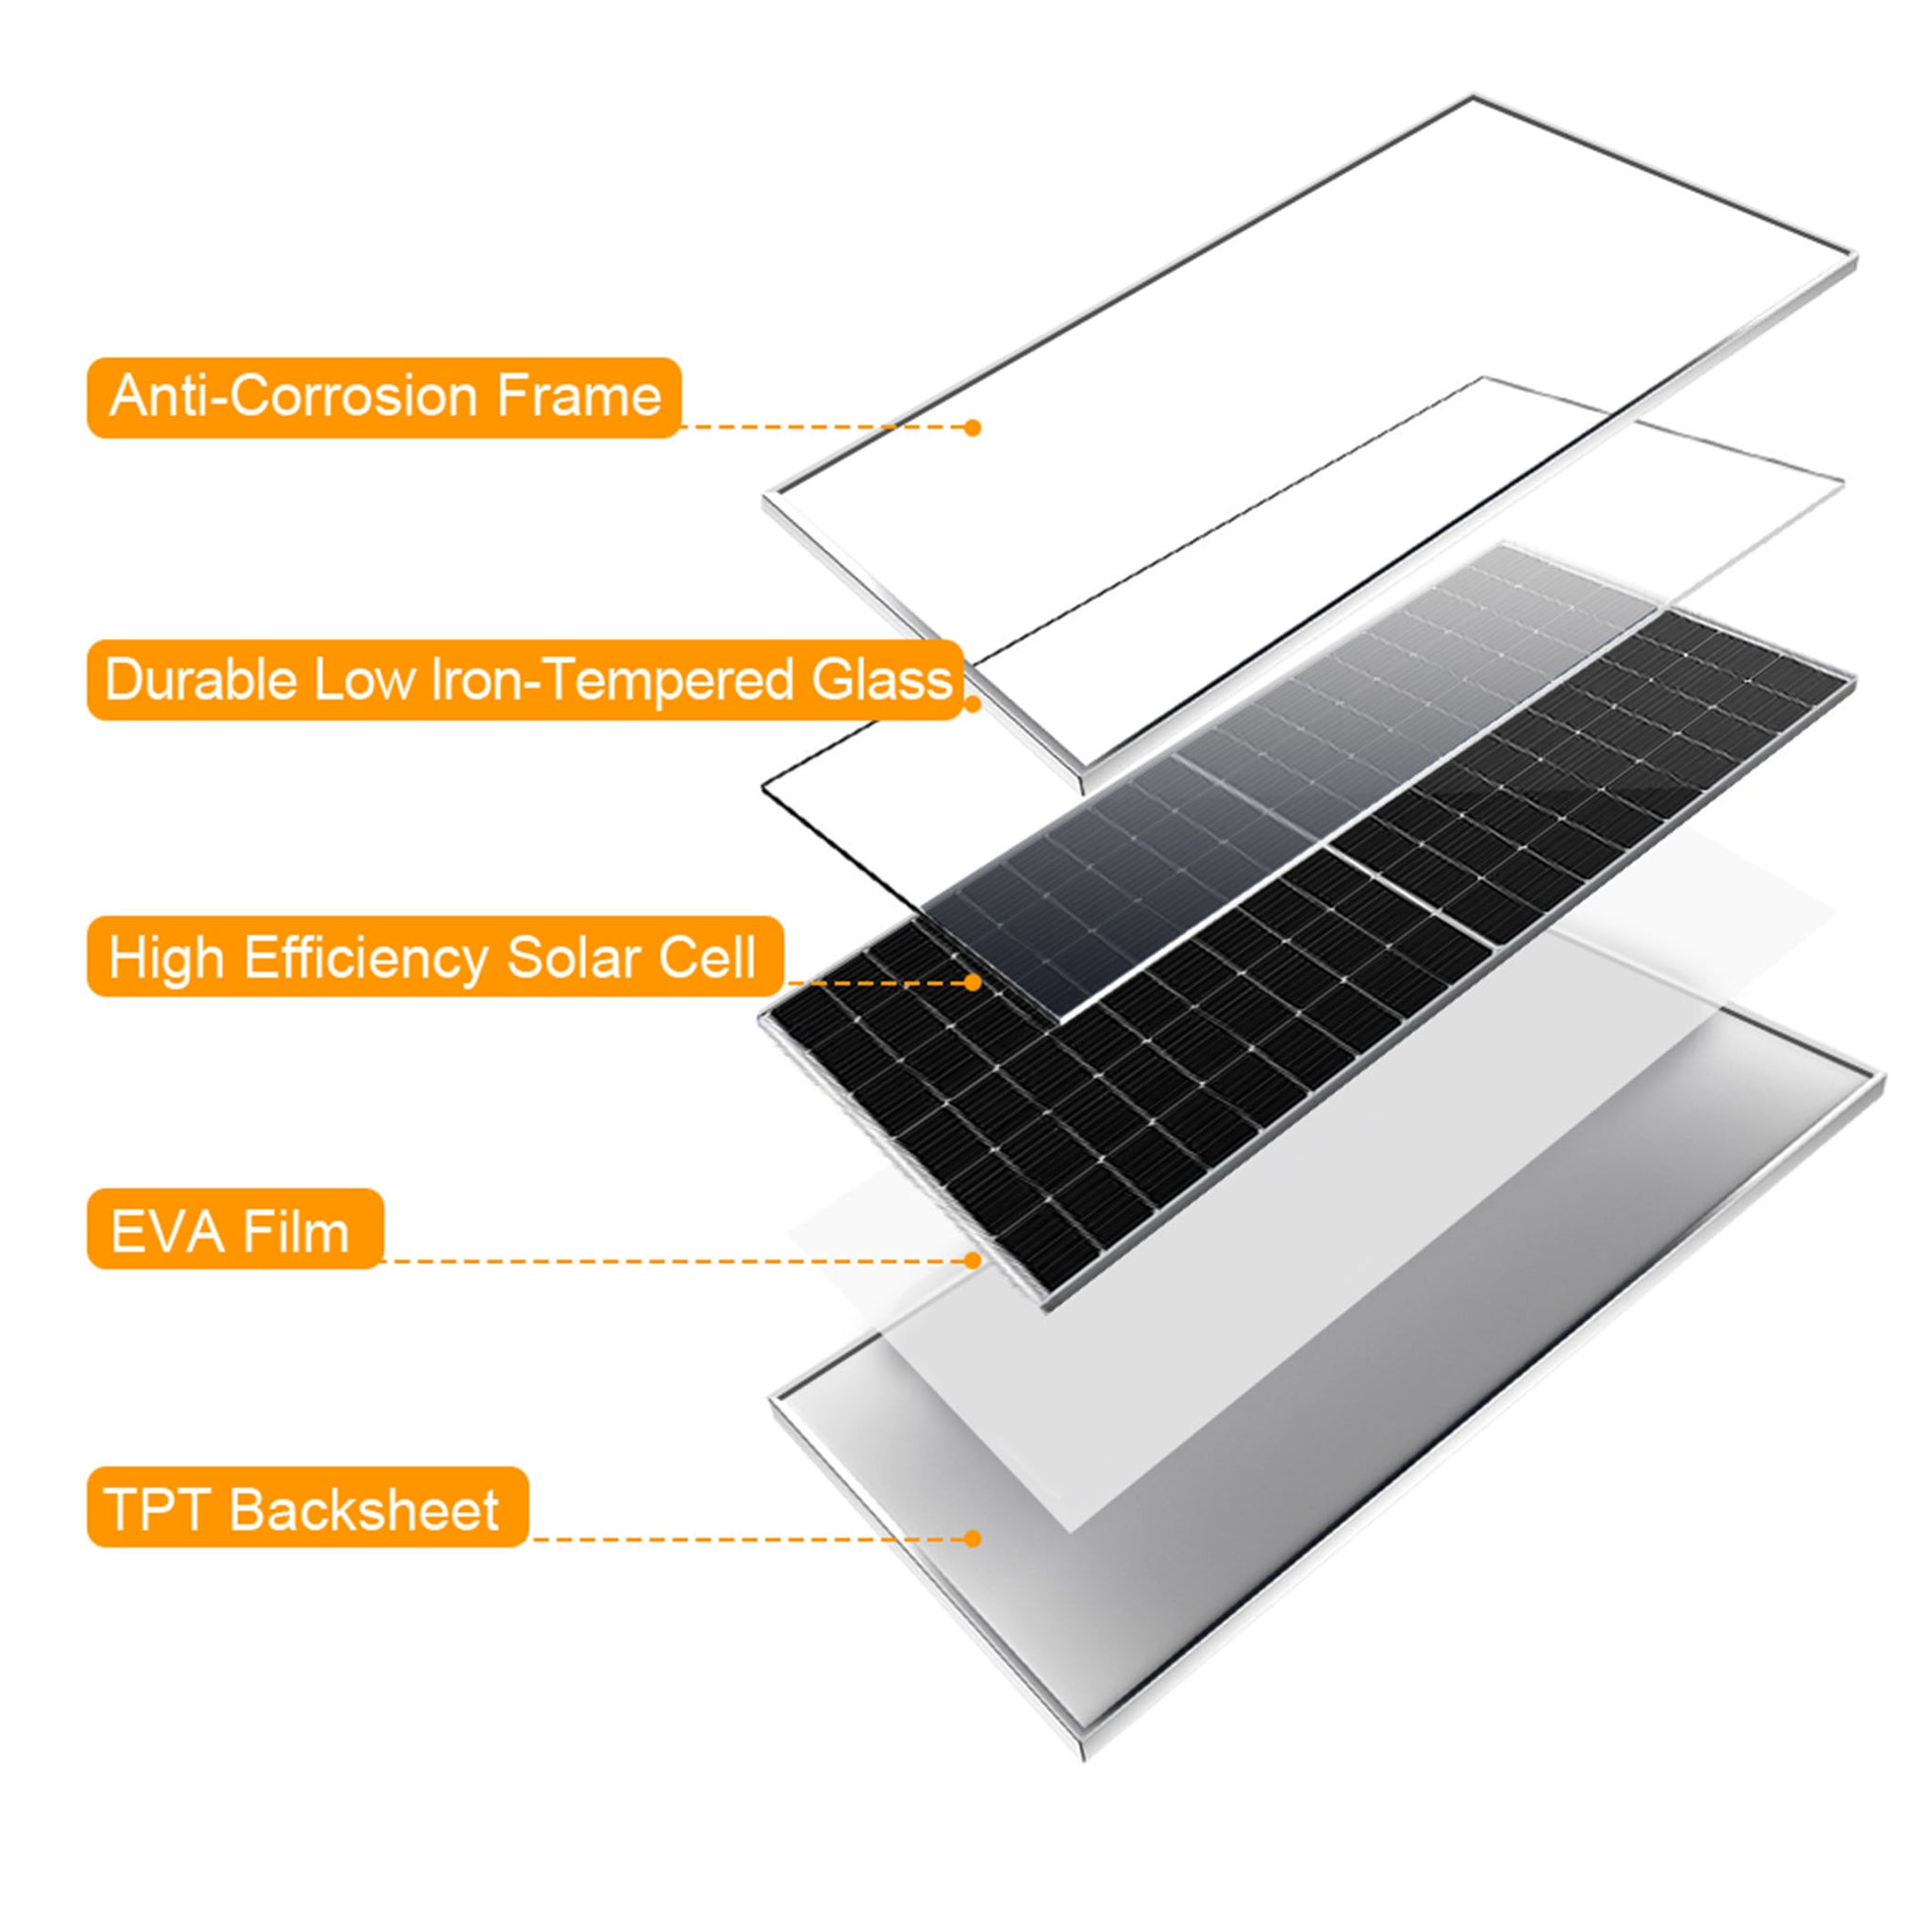 6kW Off-Grid Solar System: All-in-One Solution